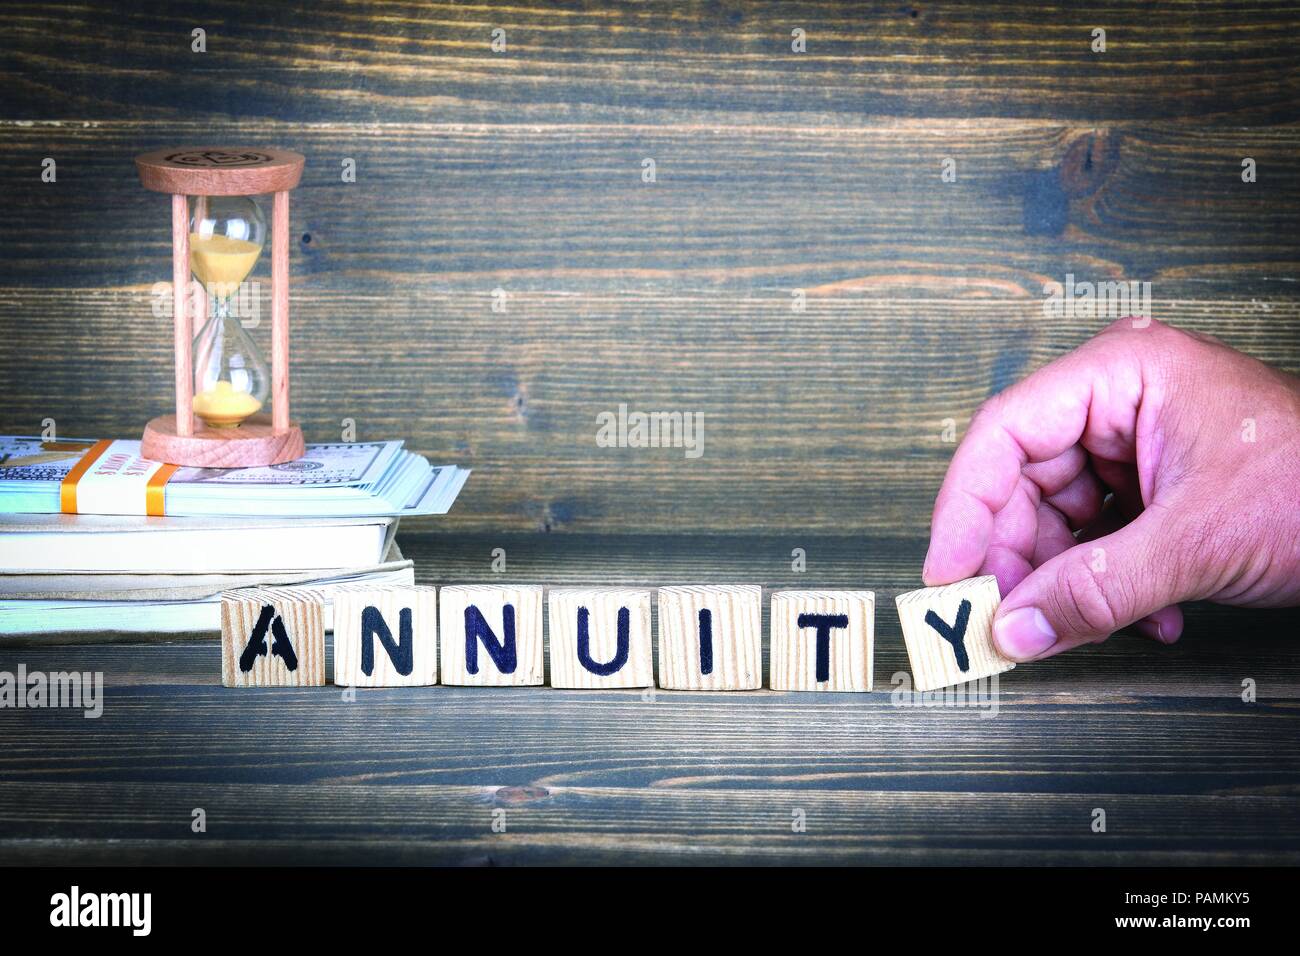 Annuity. Wooden letters on the office desk Stock Photo